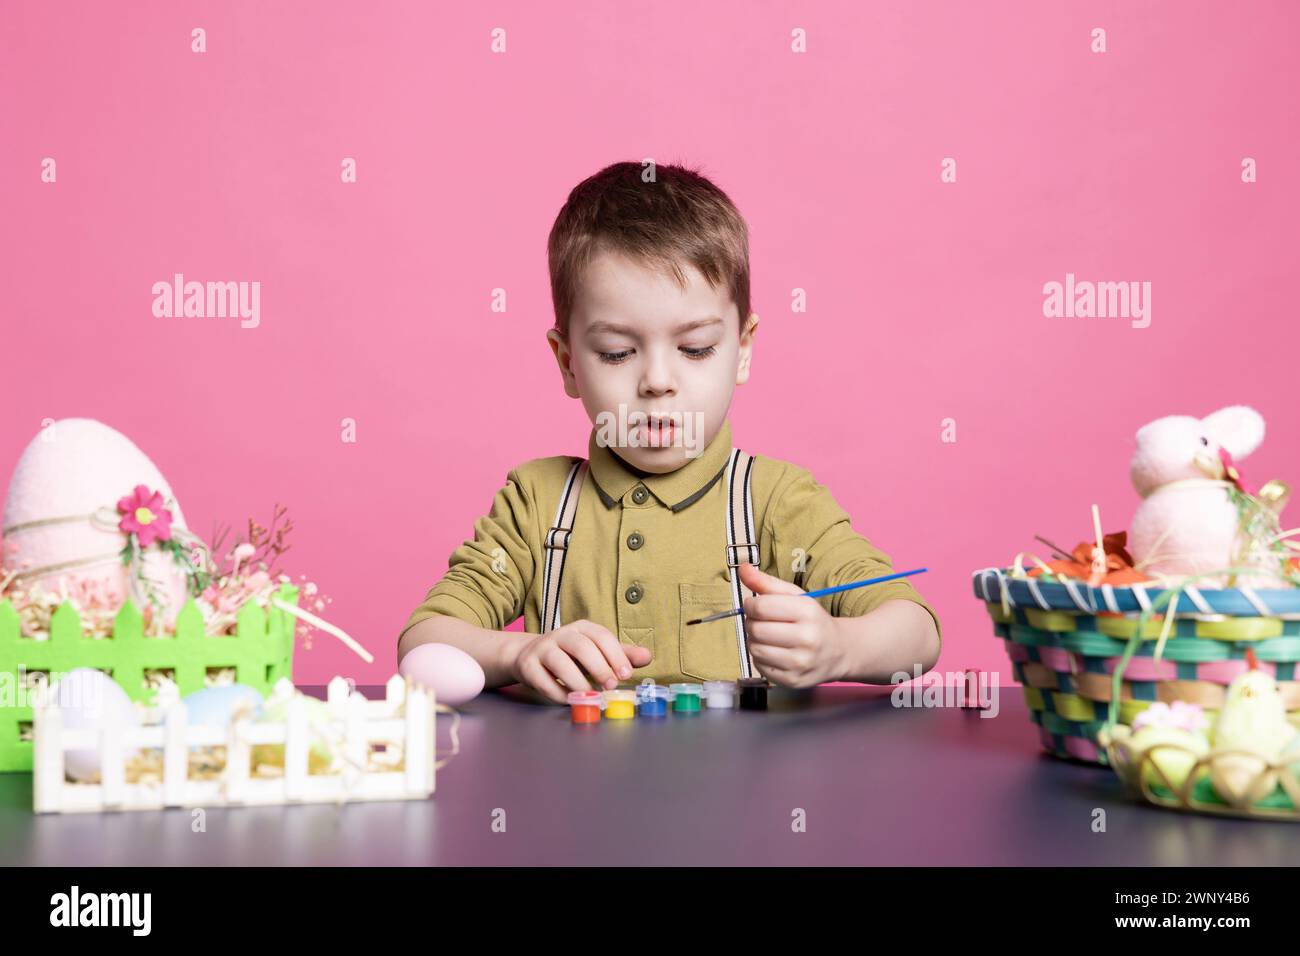 Joyful small child decorating eggs and ornaments with watercolor, coloring and crafting decorations in time for easter sunday celebration. Young cheerful boy painting with tie dye. Stock Photo